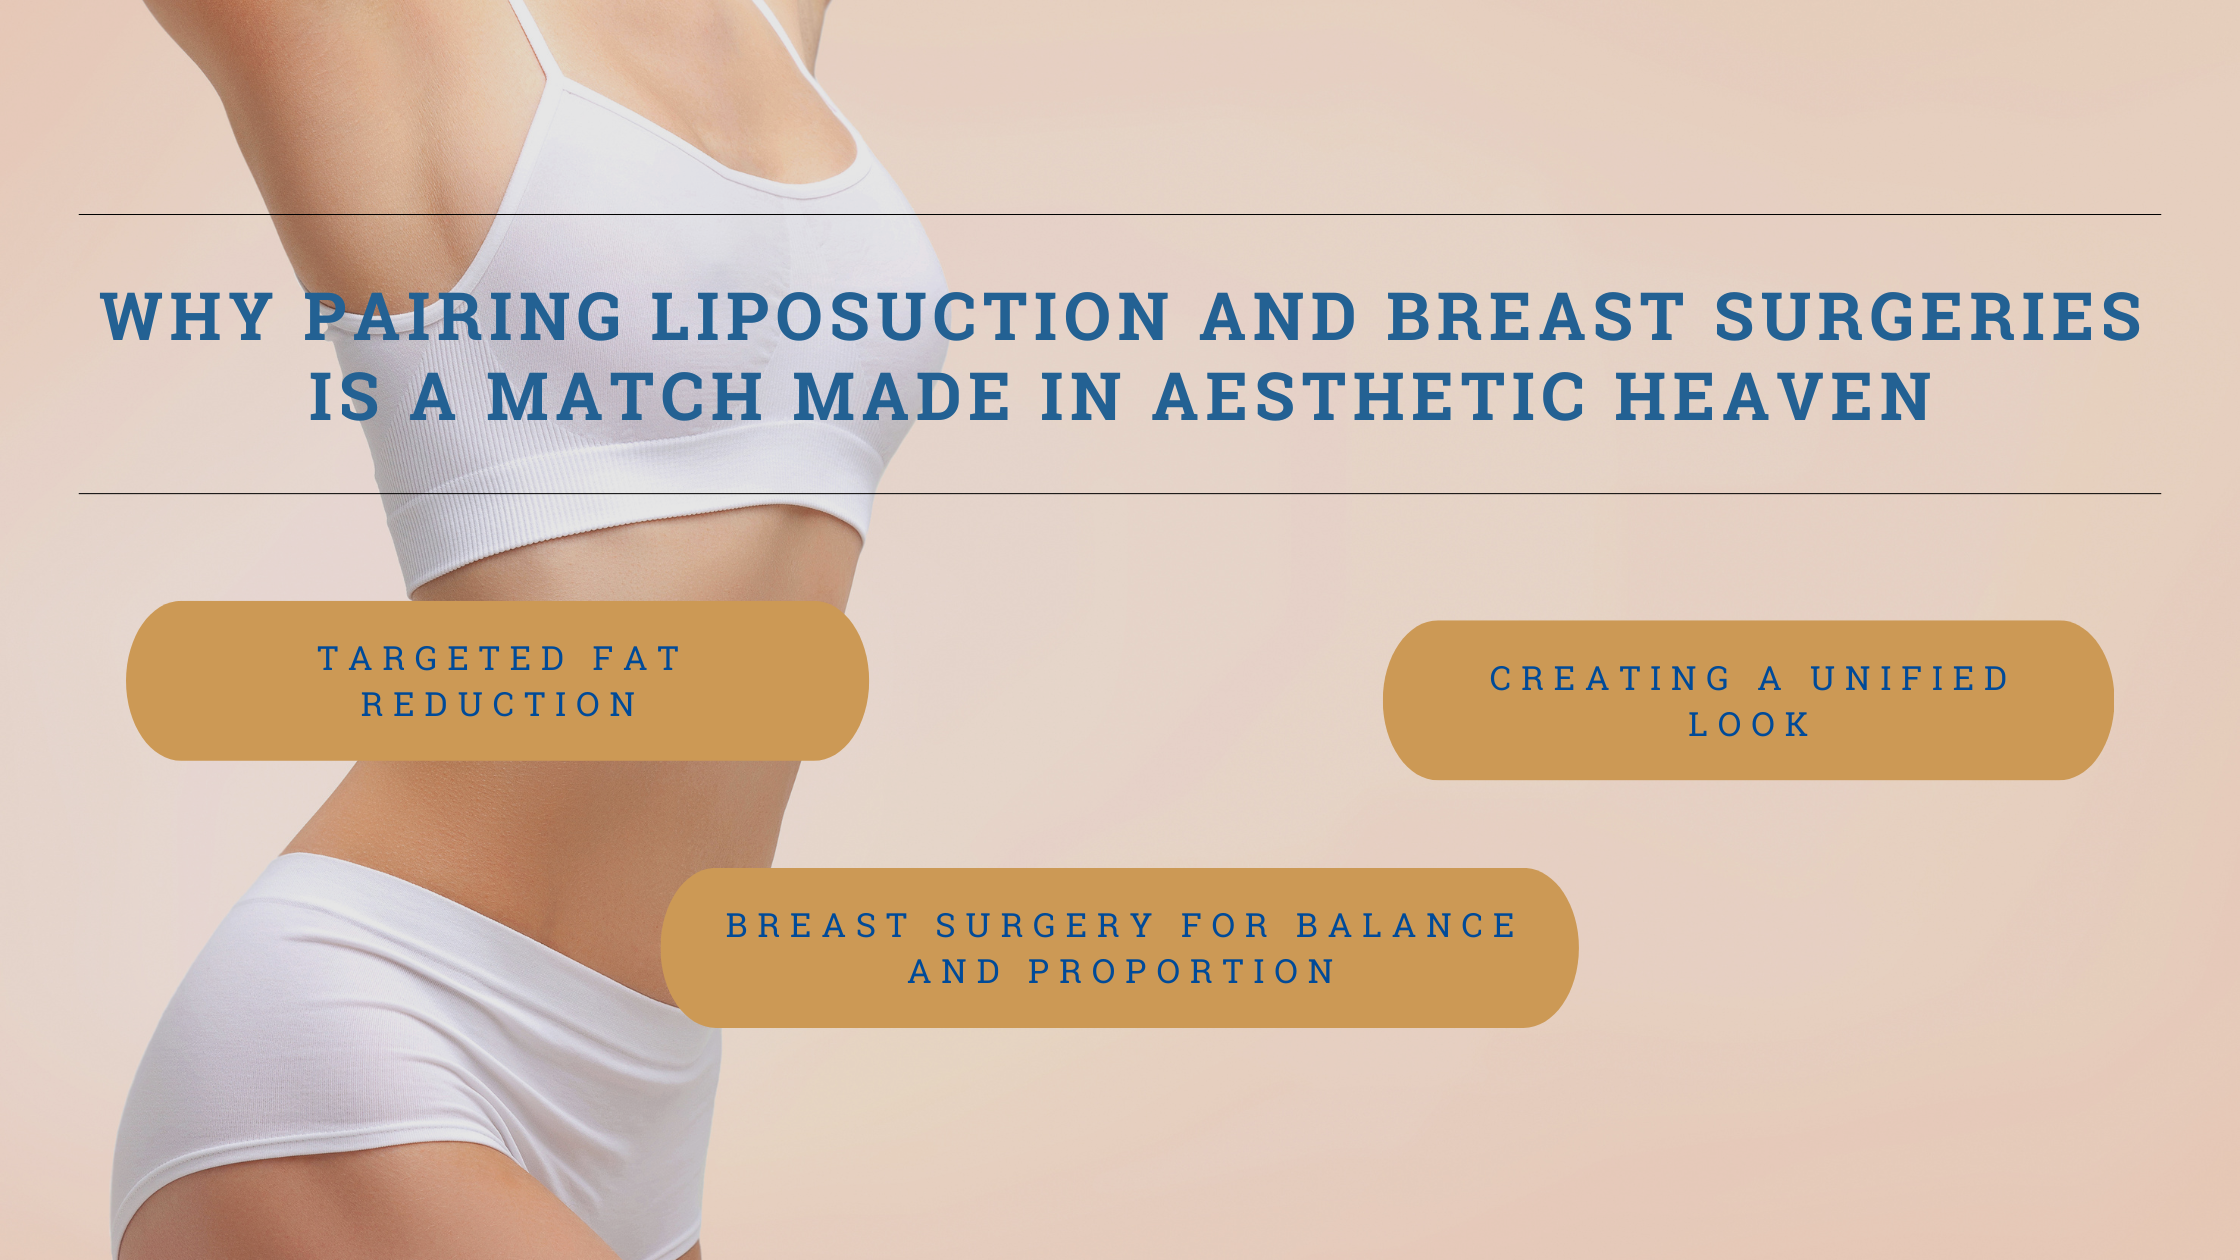 Pairing liposuction and breast surgeries